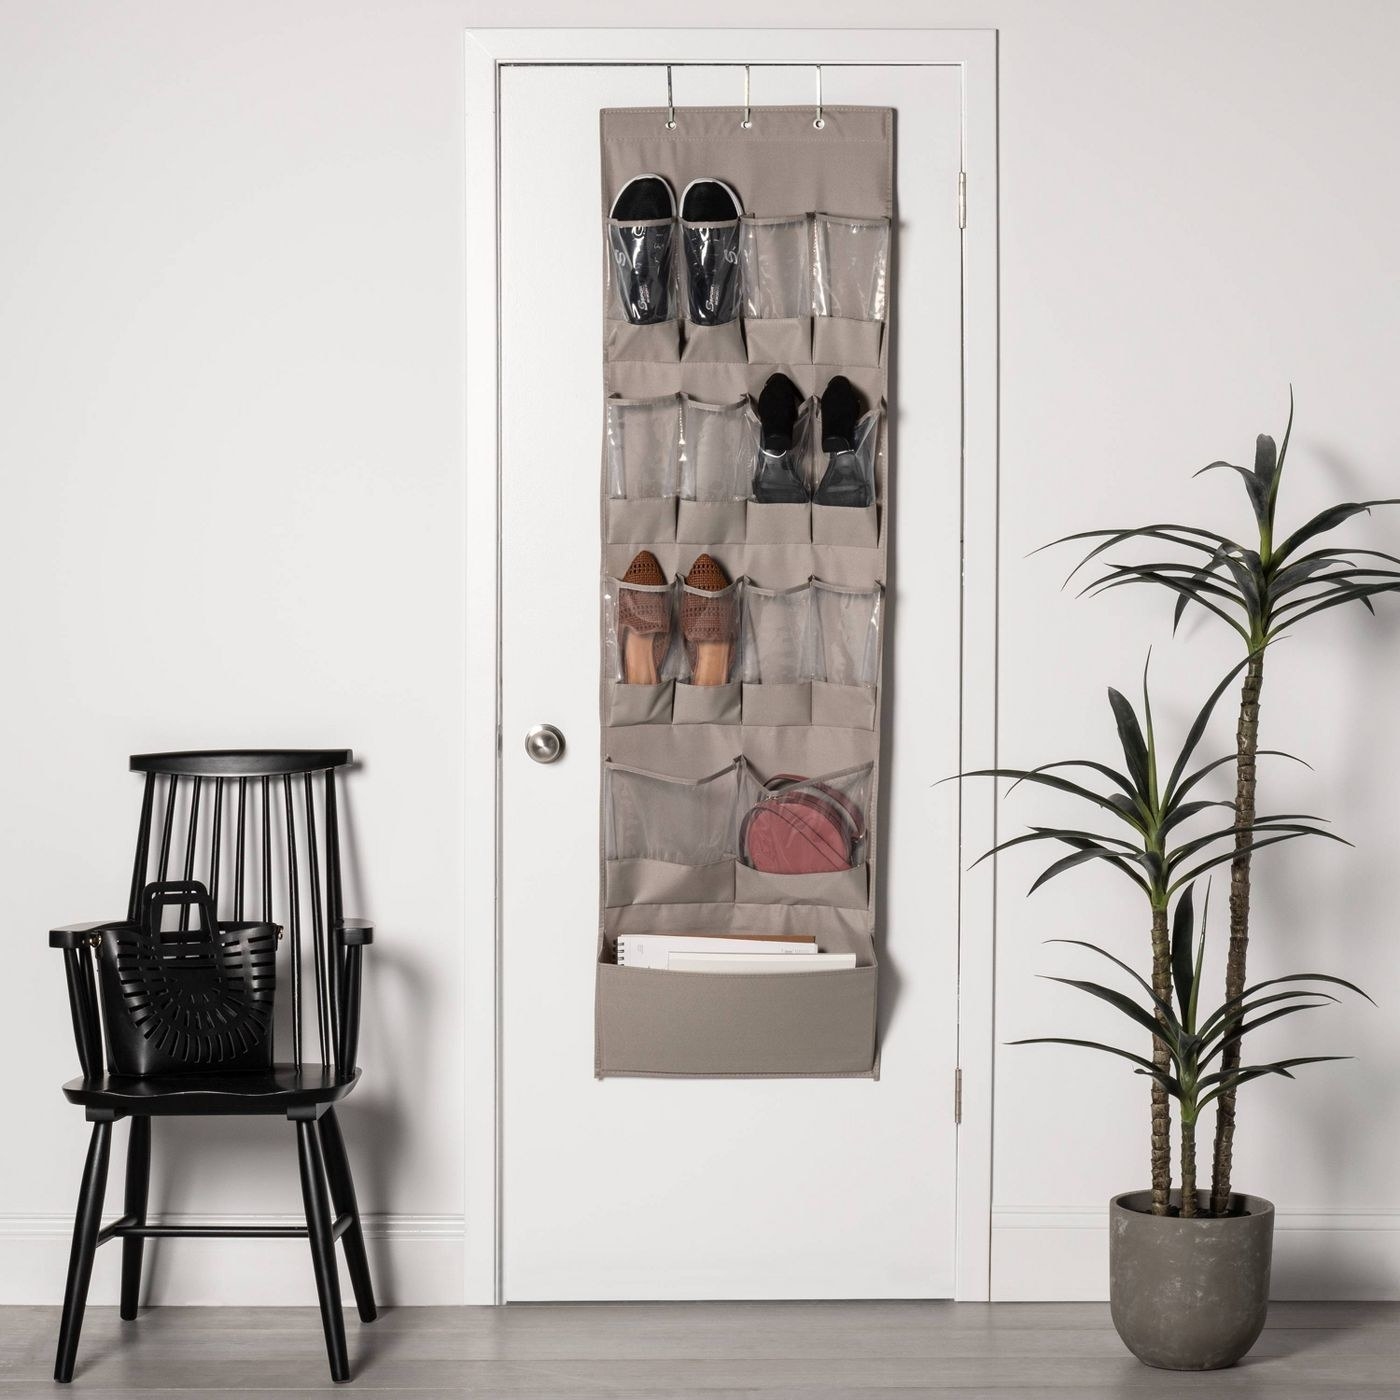 An image of a over-the-door shoe organizer